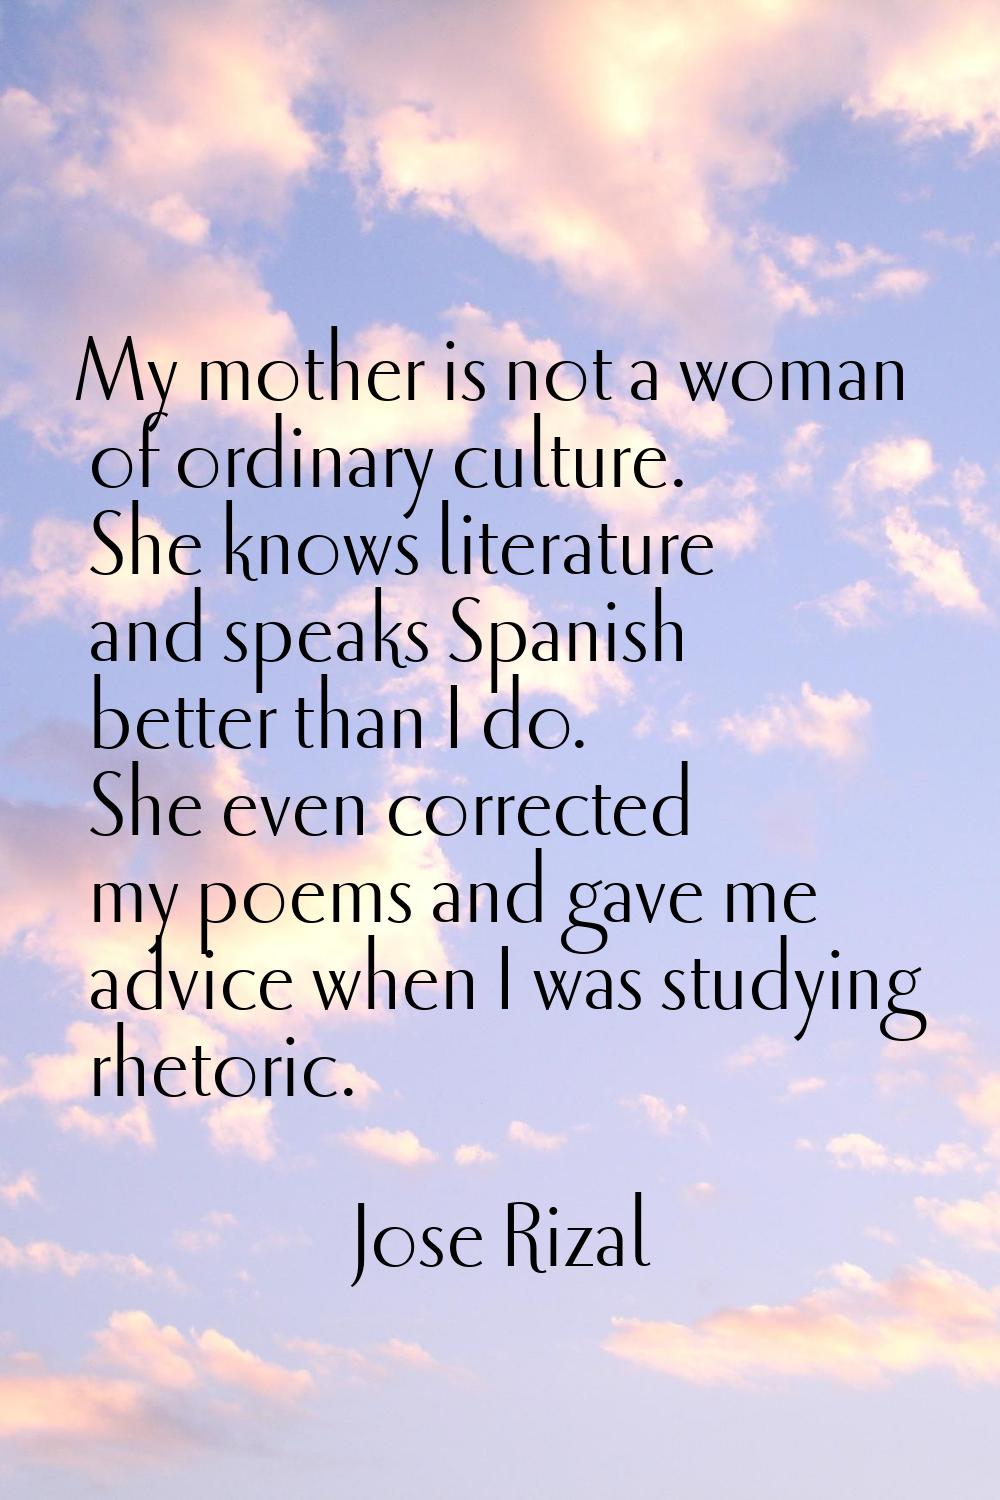 My mother is not a woman of ordinary culture. She knows literature and speaks Spanish better than I